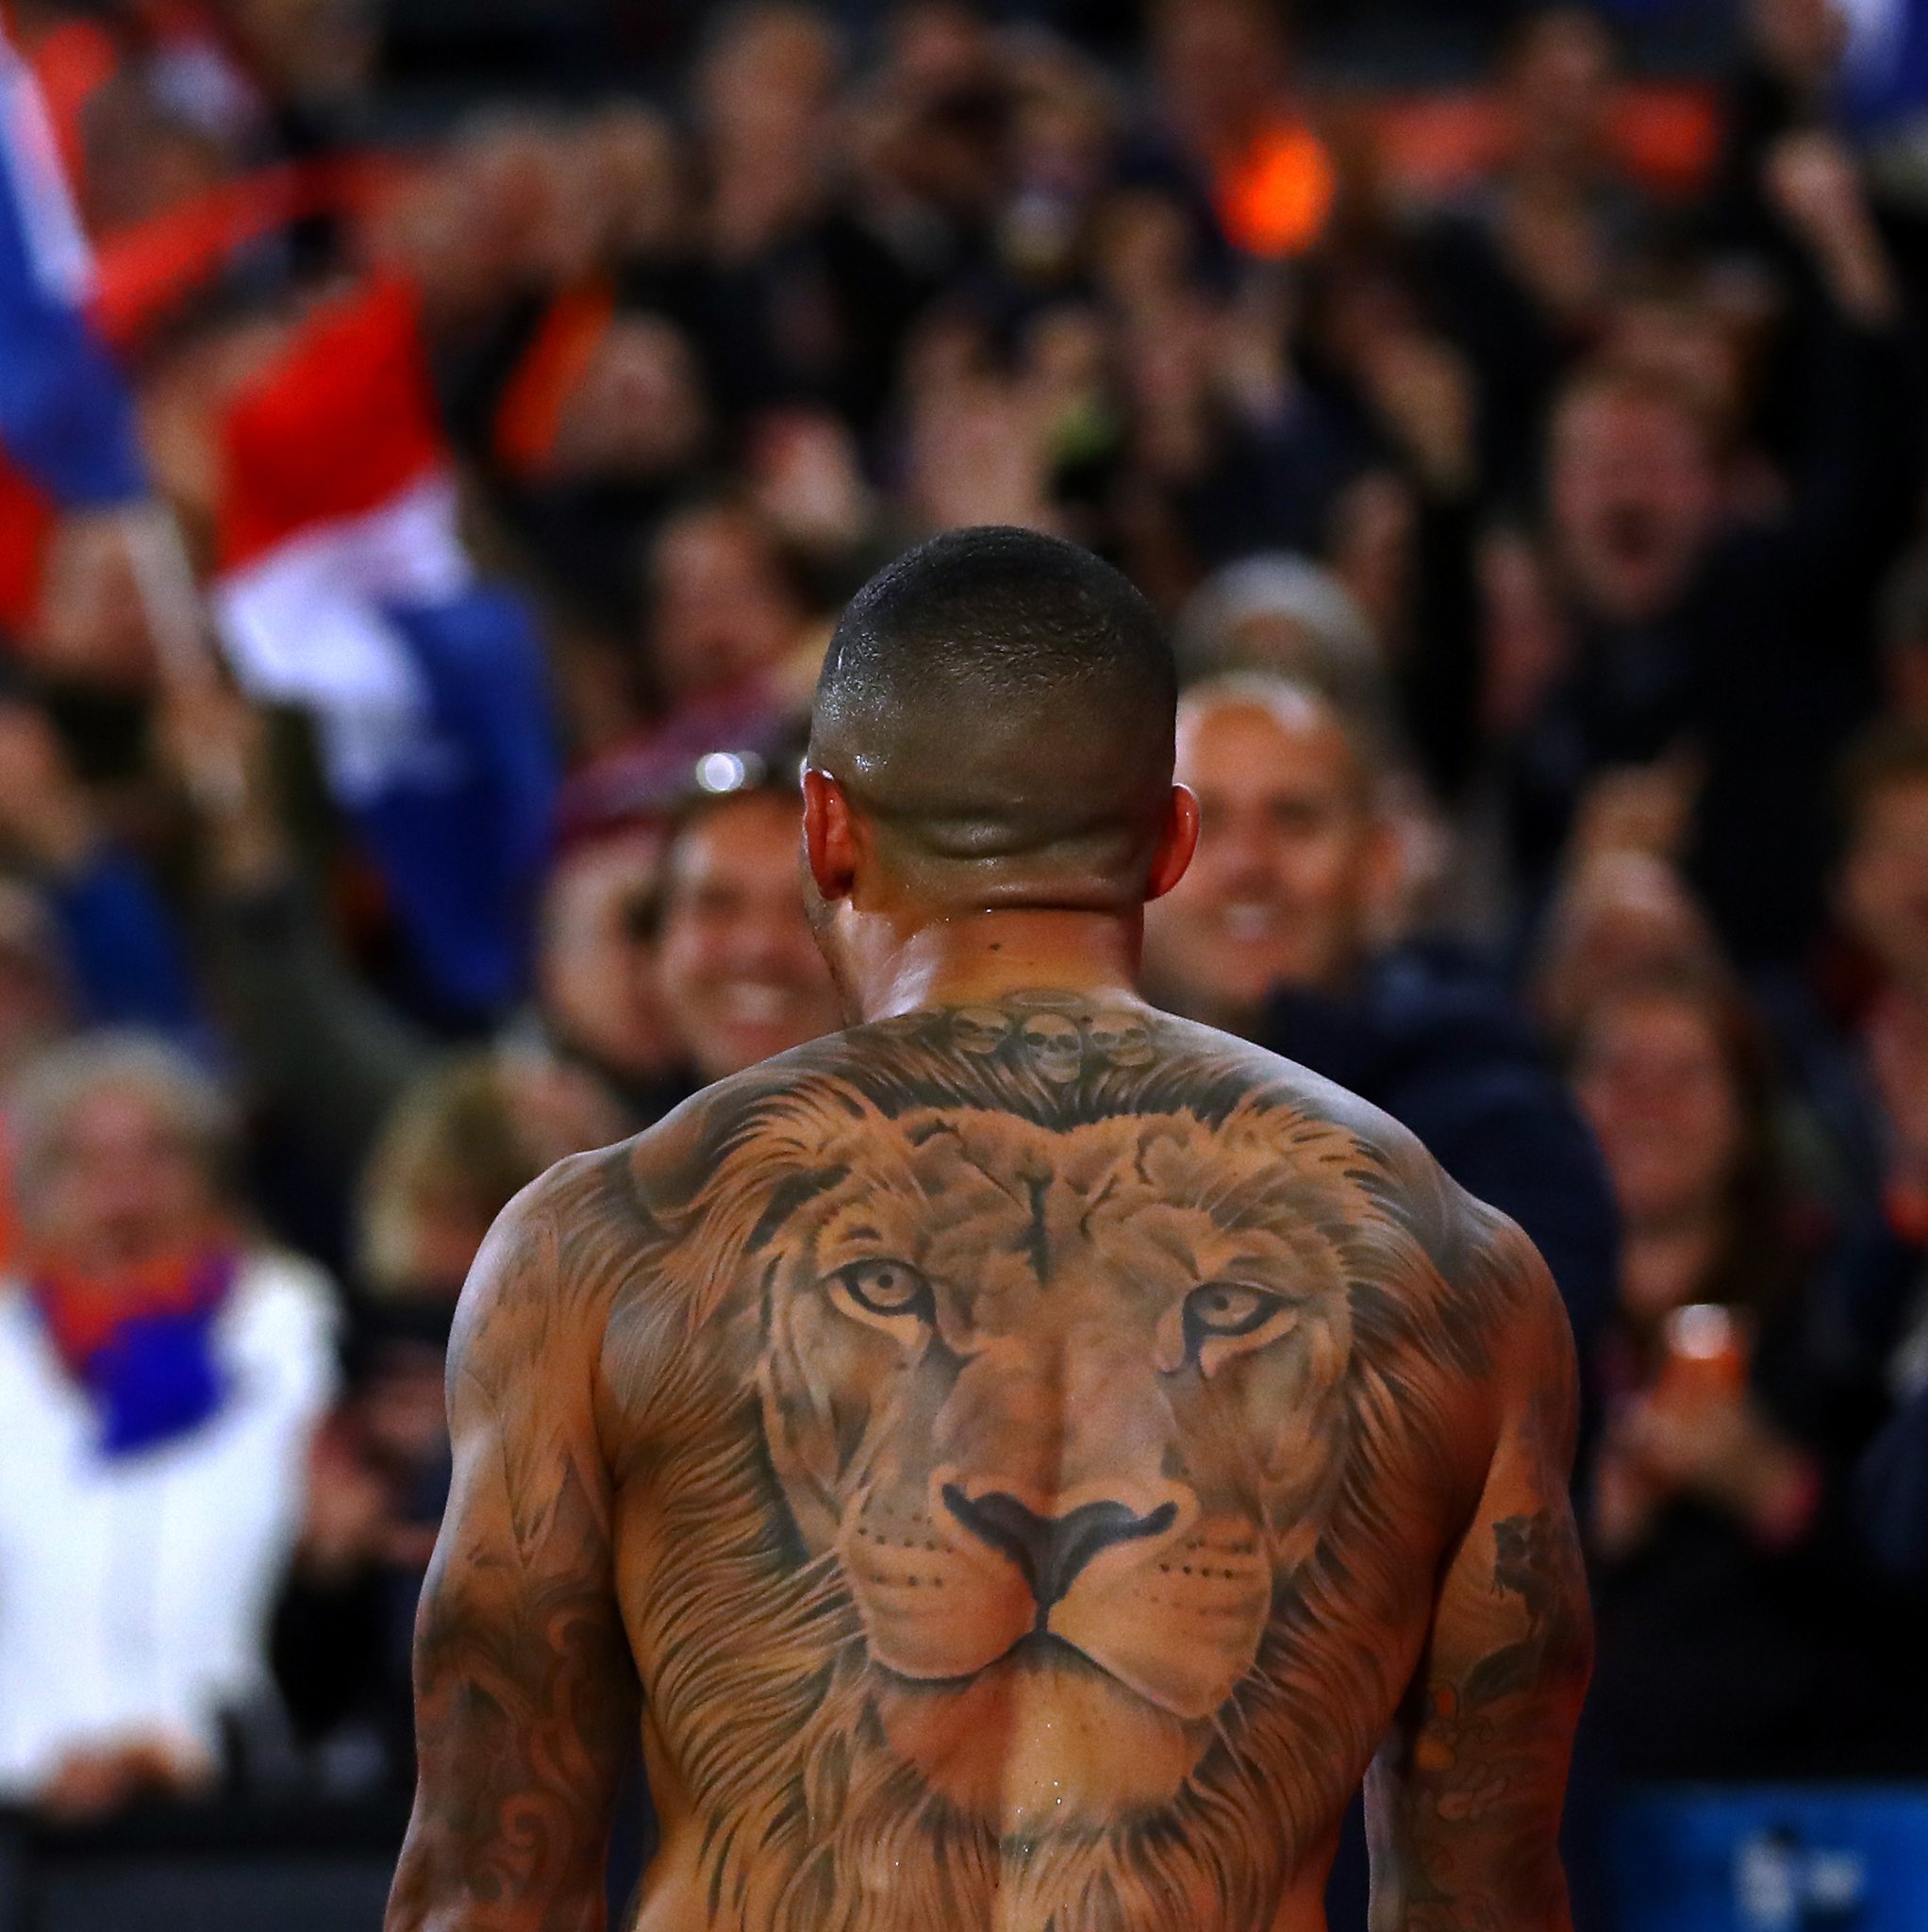 “Happy 26th birthday to Lyon and Netherlands star Memphis Depay 🎉
...